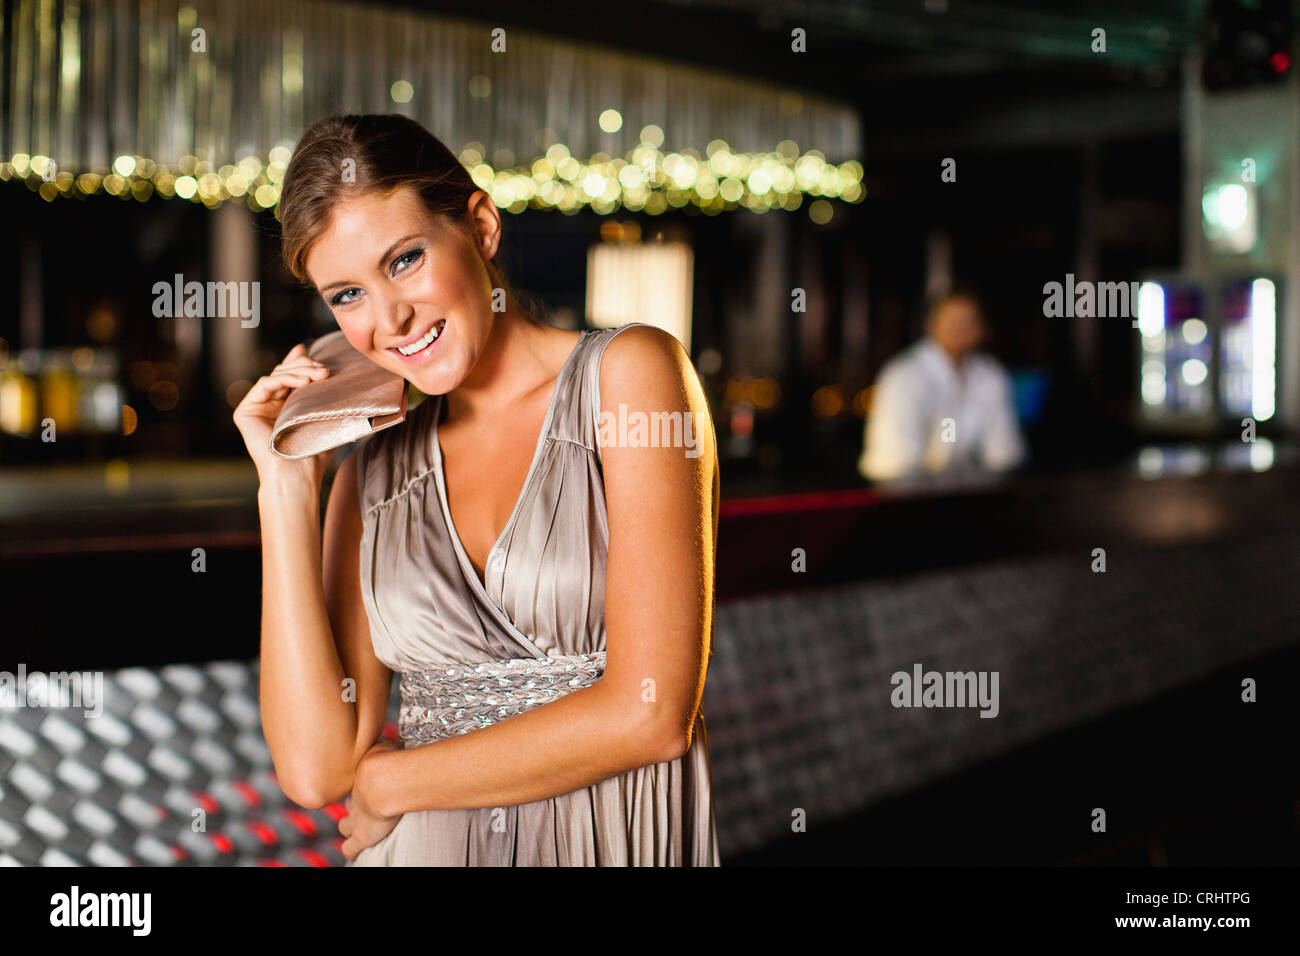 Smiling woman standing in bar Banque D'Images